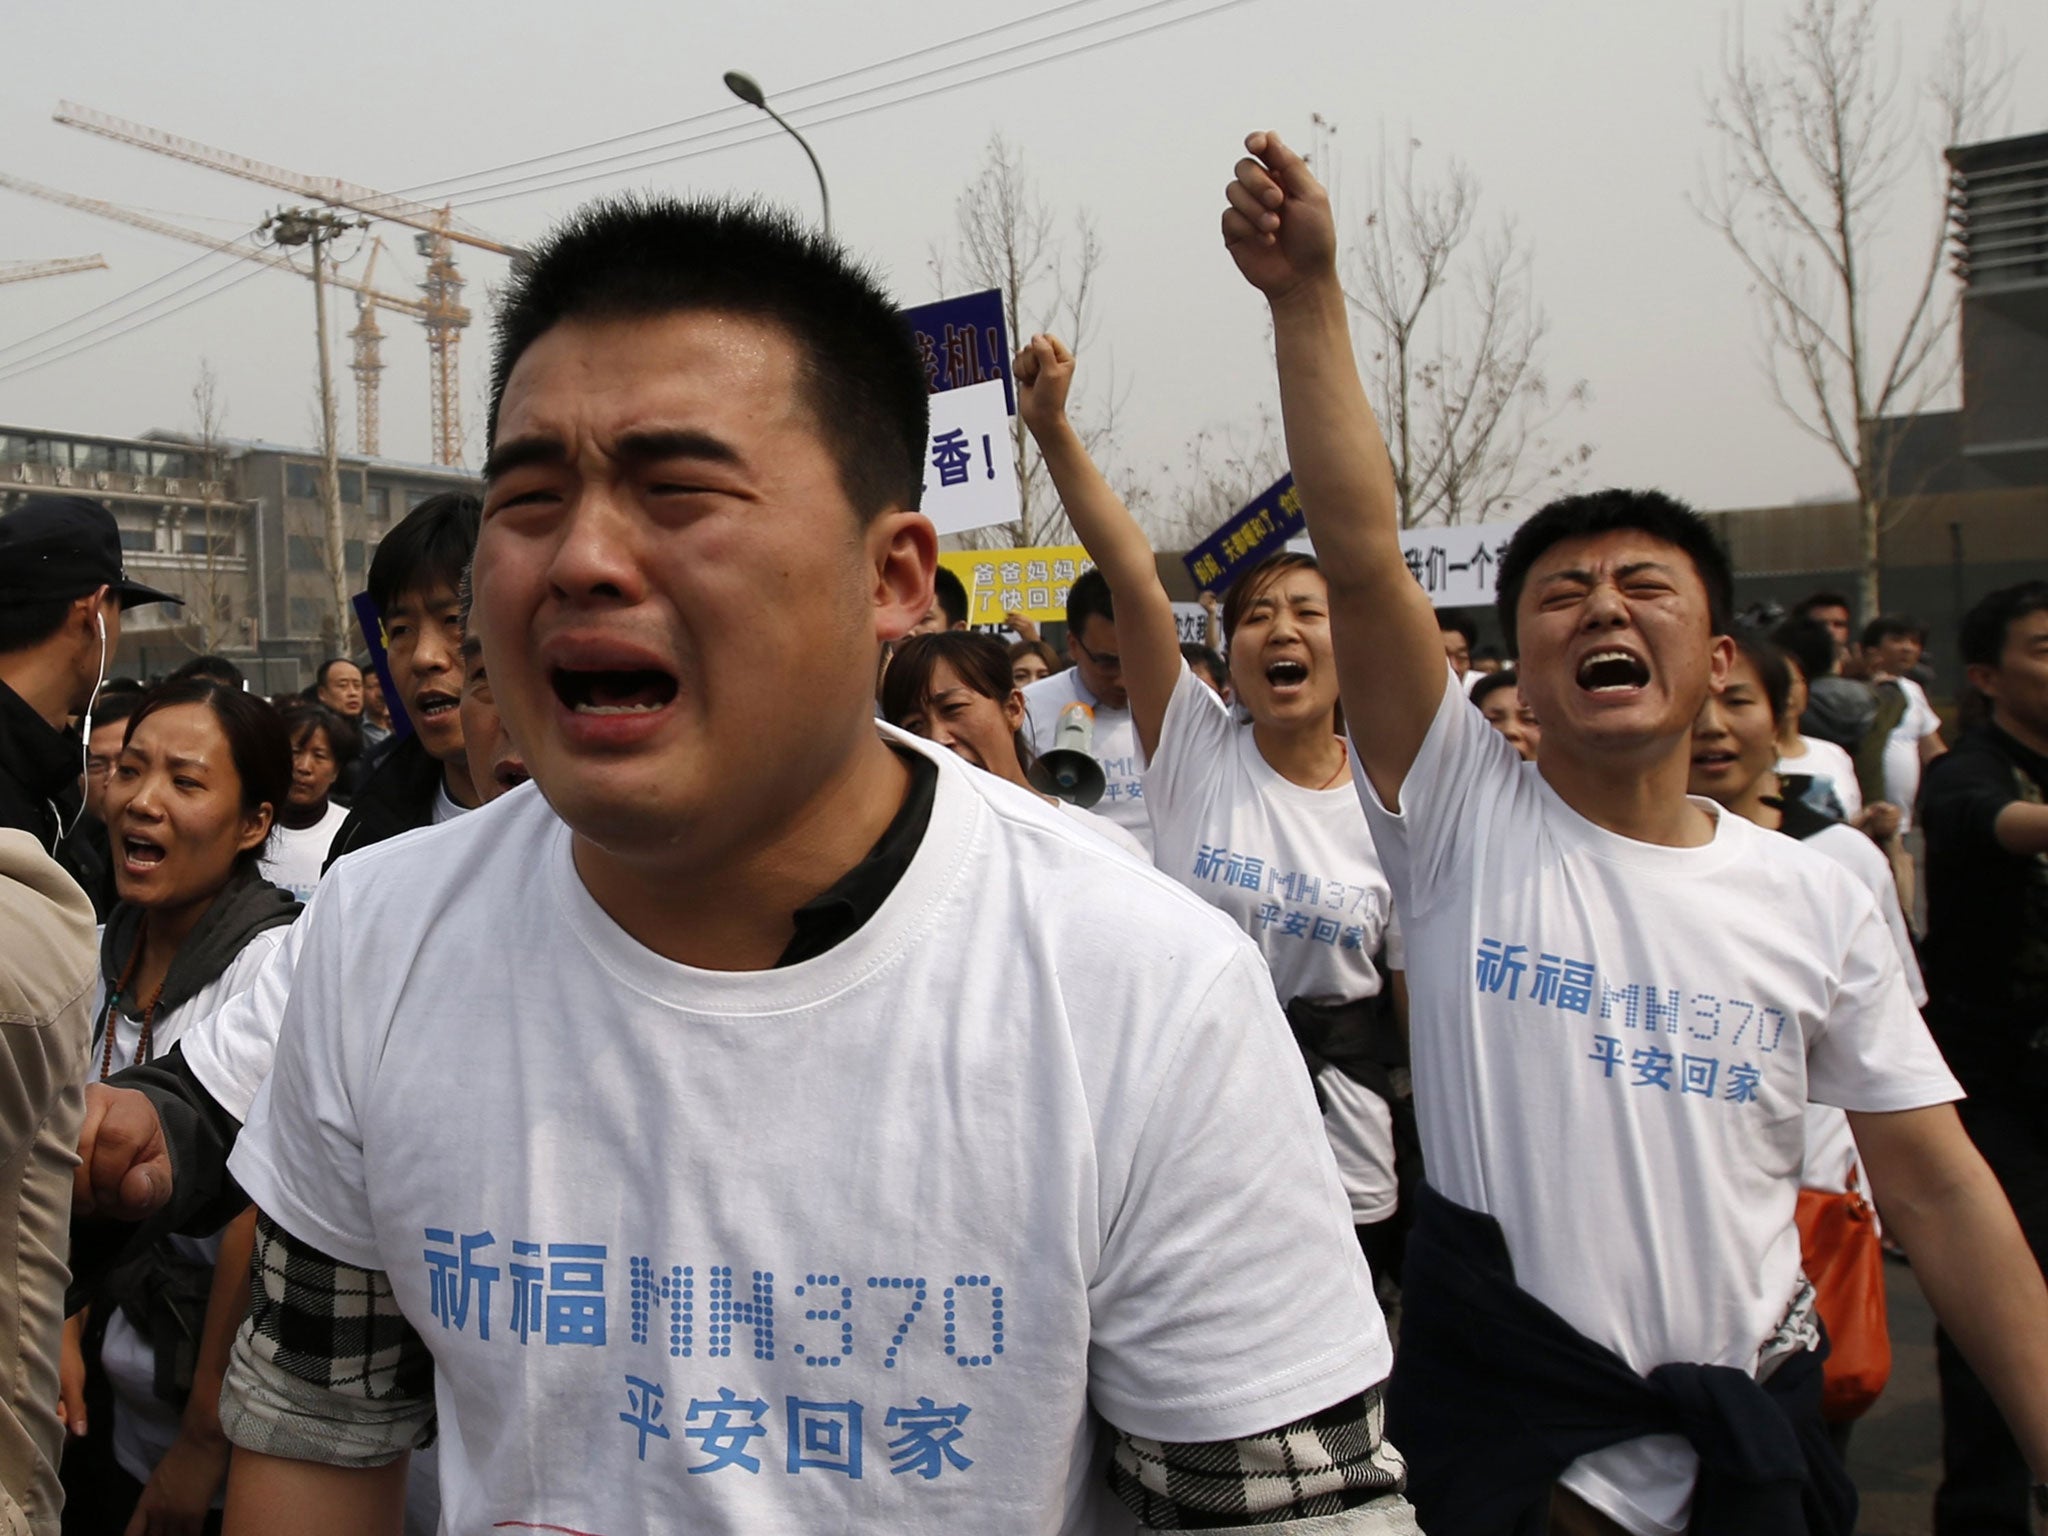 Dozens of angry relatives of passengers on the lost Malaysian jetliner clashed with police in Beijing on Tuesday, accusing the Southeast Asian country of "delays and deception"